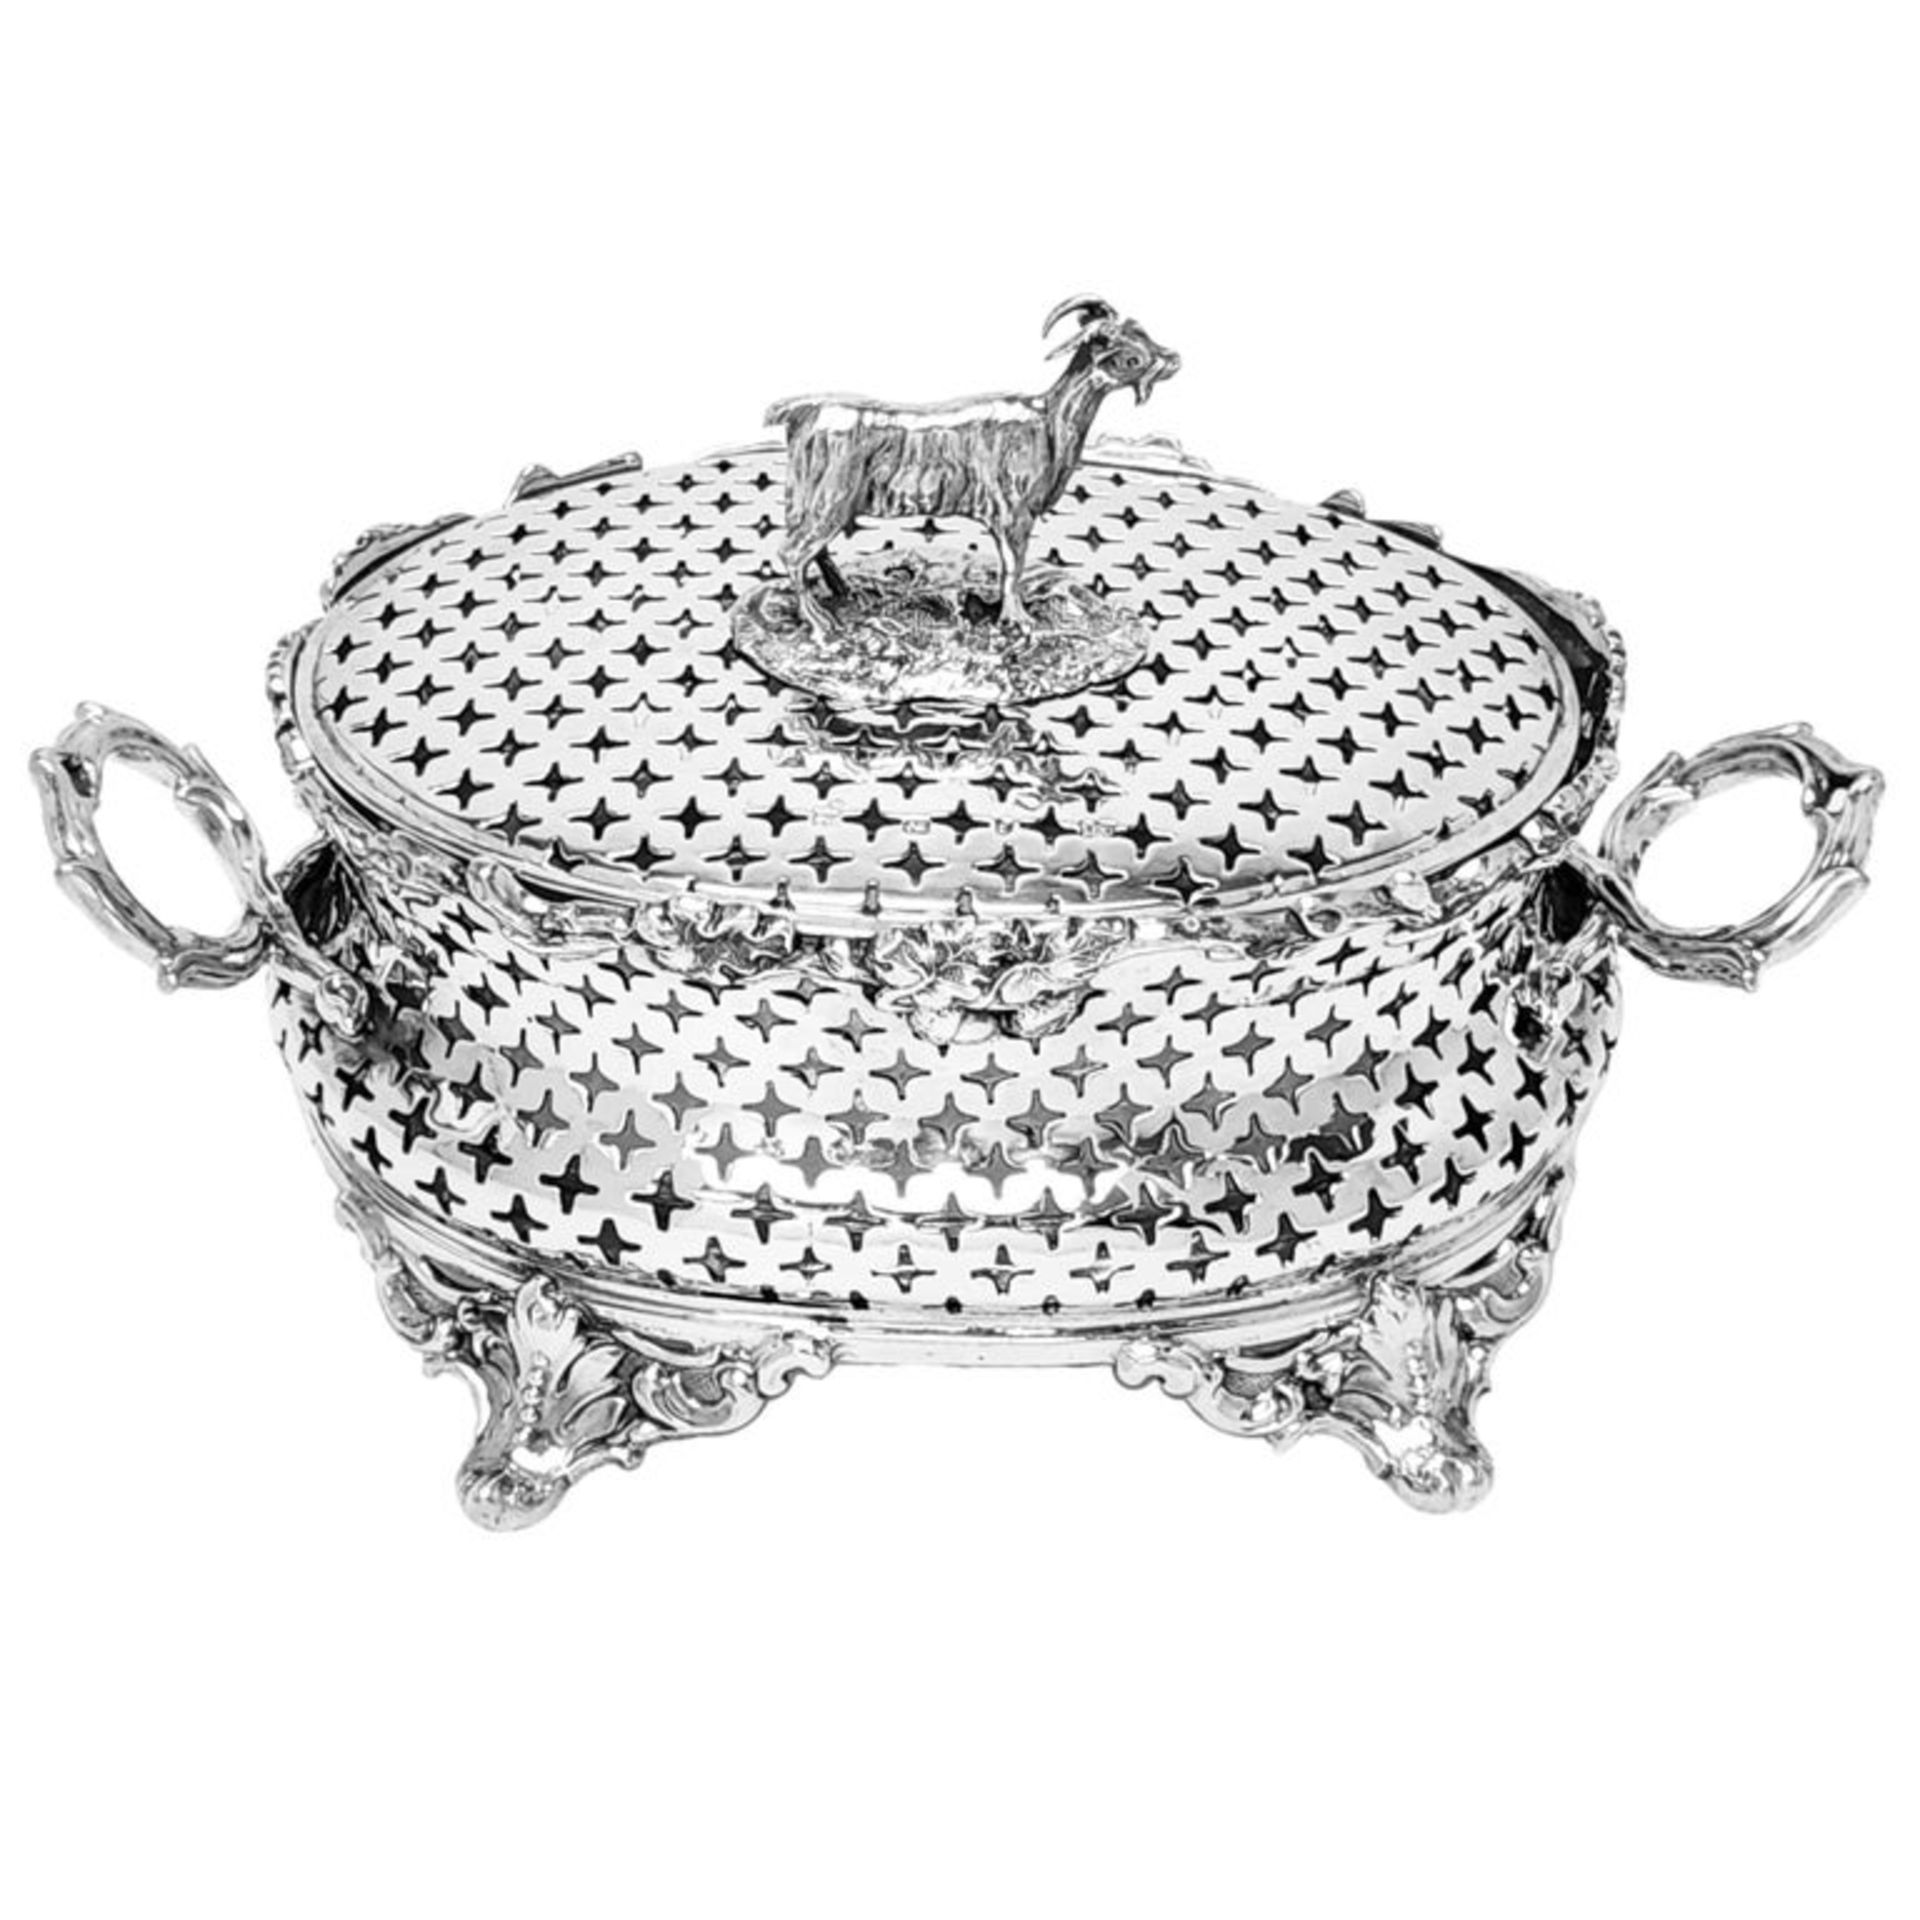 A FINE STERLING SILVER BUTTER DISH BY HENRY WILKINSON & CO.1852 - Image 7 of 14